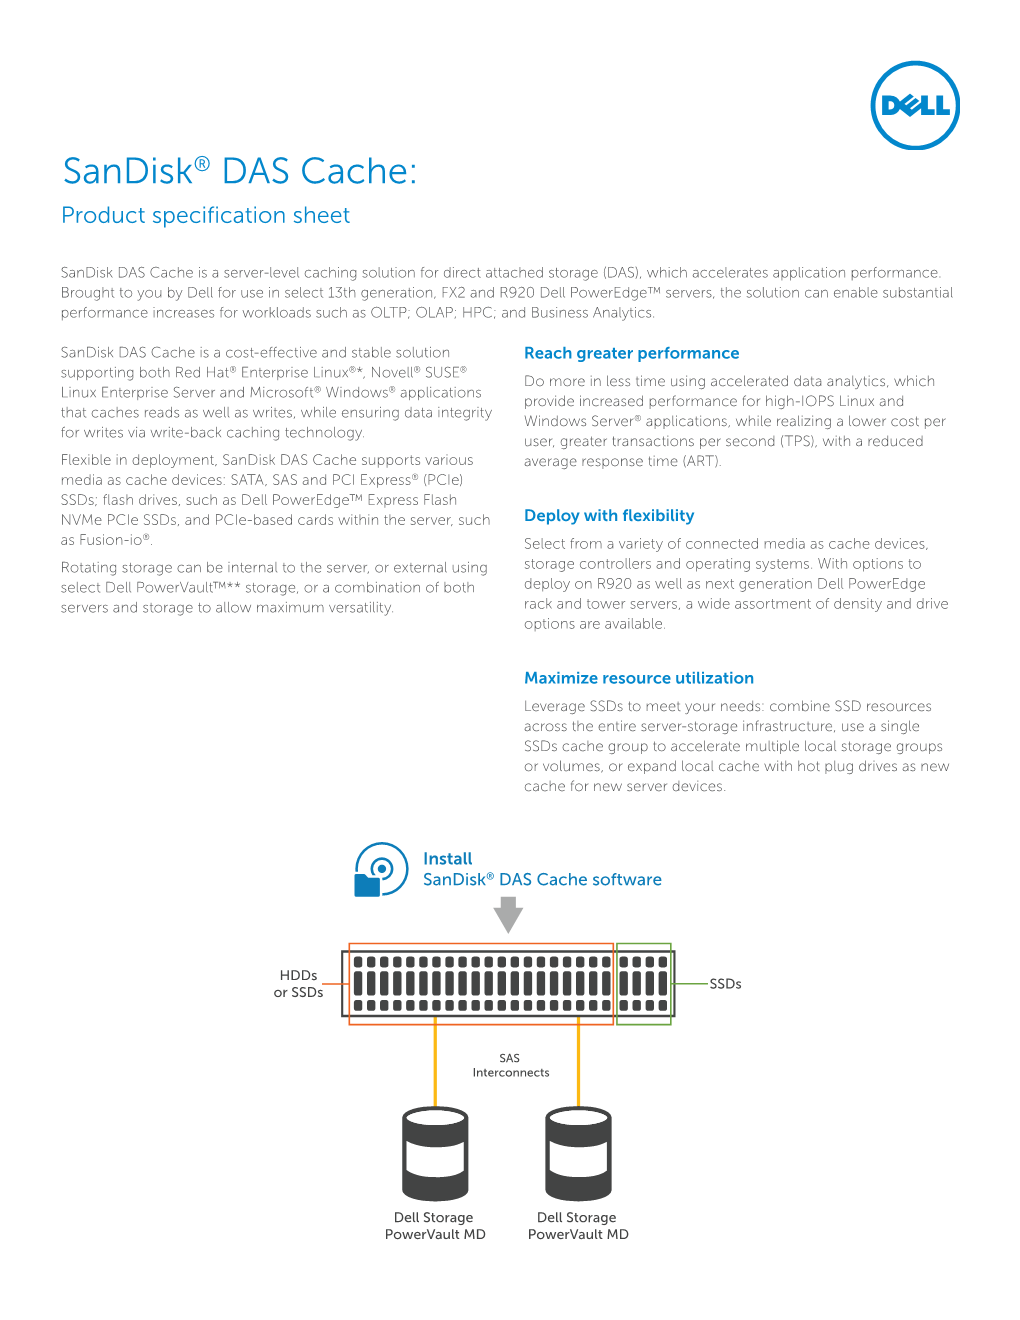 Sandisk® DAS Cache: Product Specification Sheet